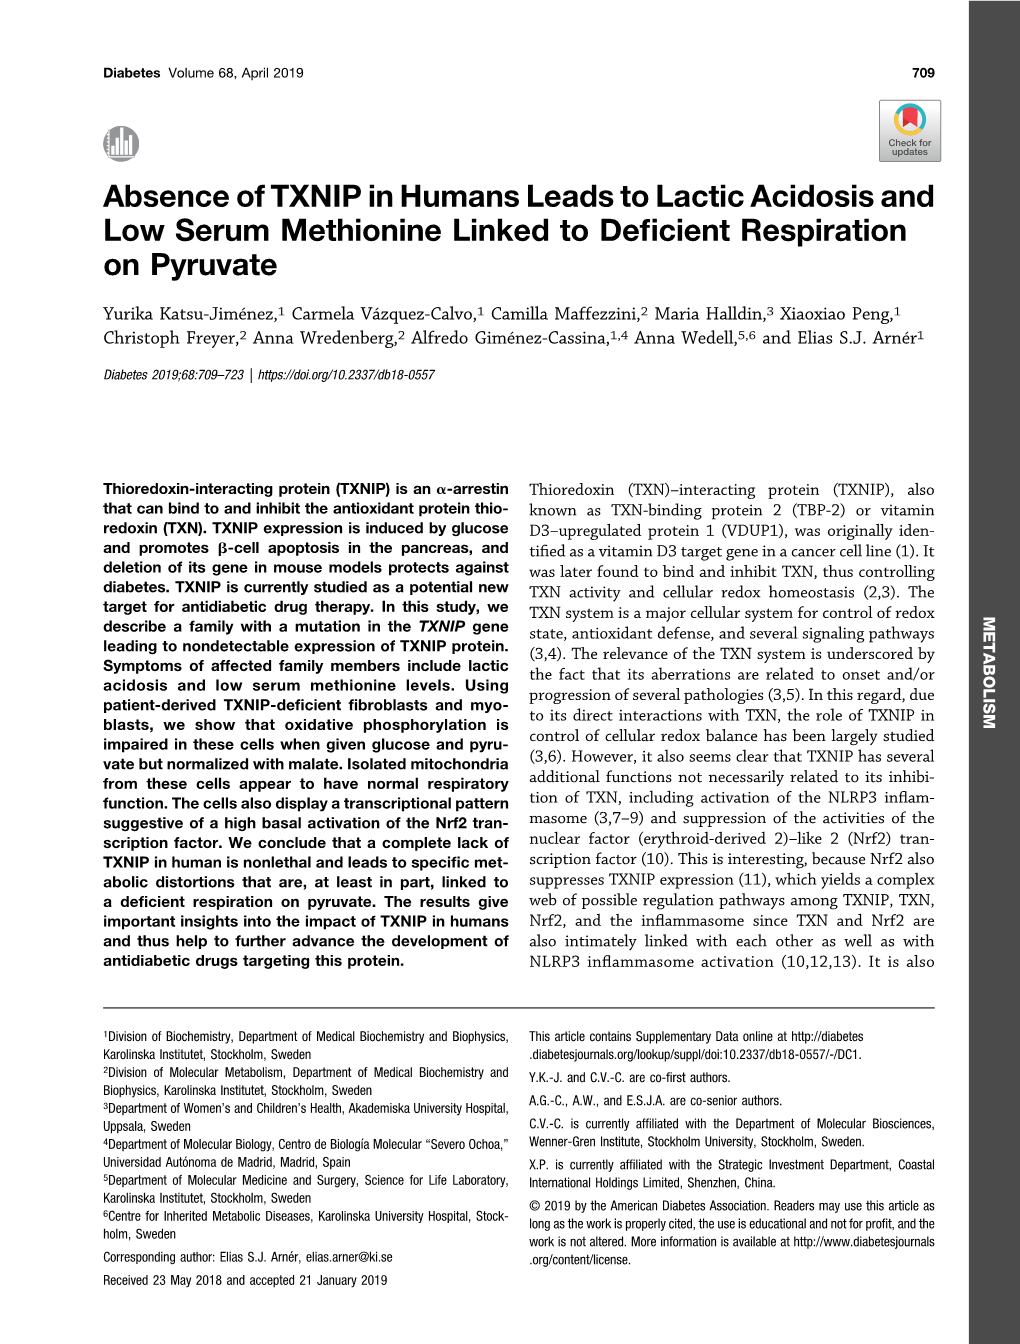 Absence of TXNIP in Humans Leads to Lactic Acidosis and Low Serum Methionine Linked to Deficient Respiration on Pyruvate